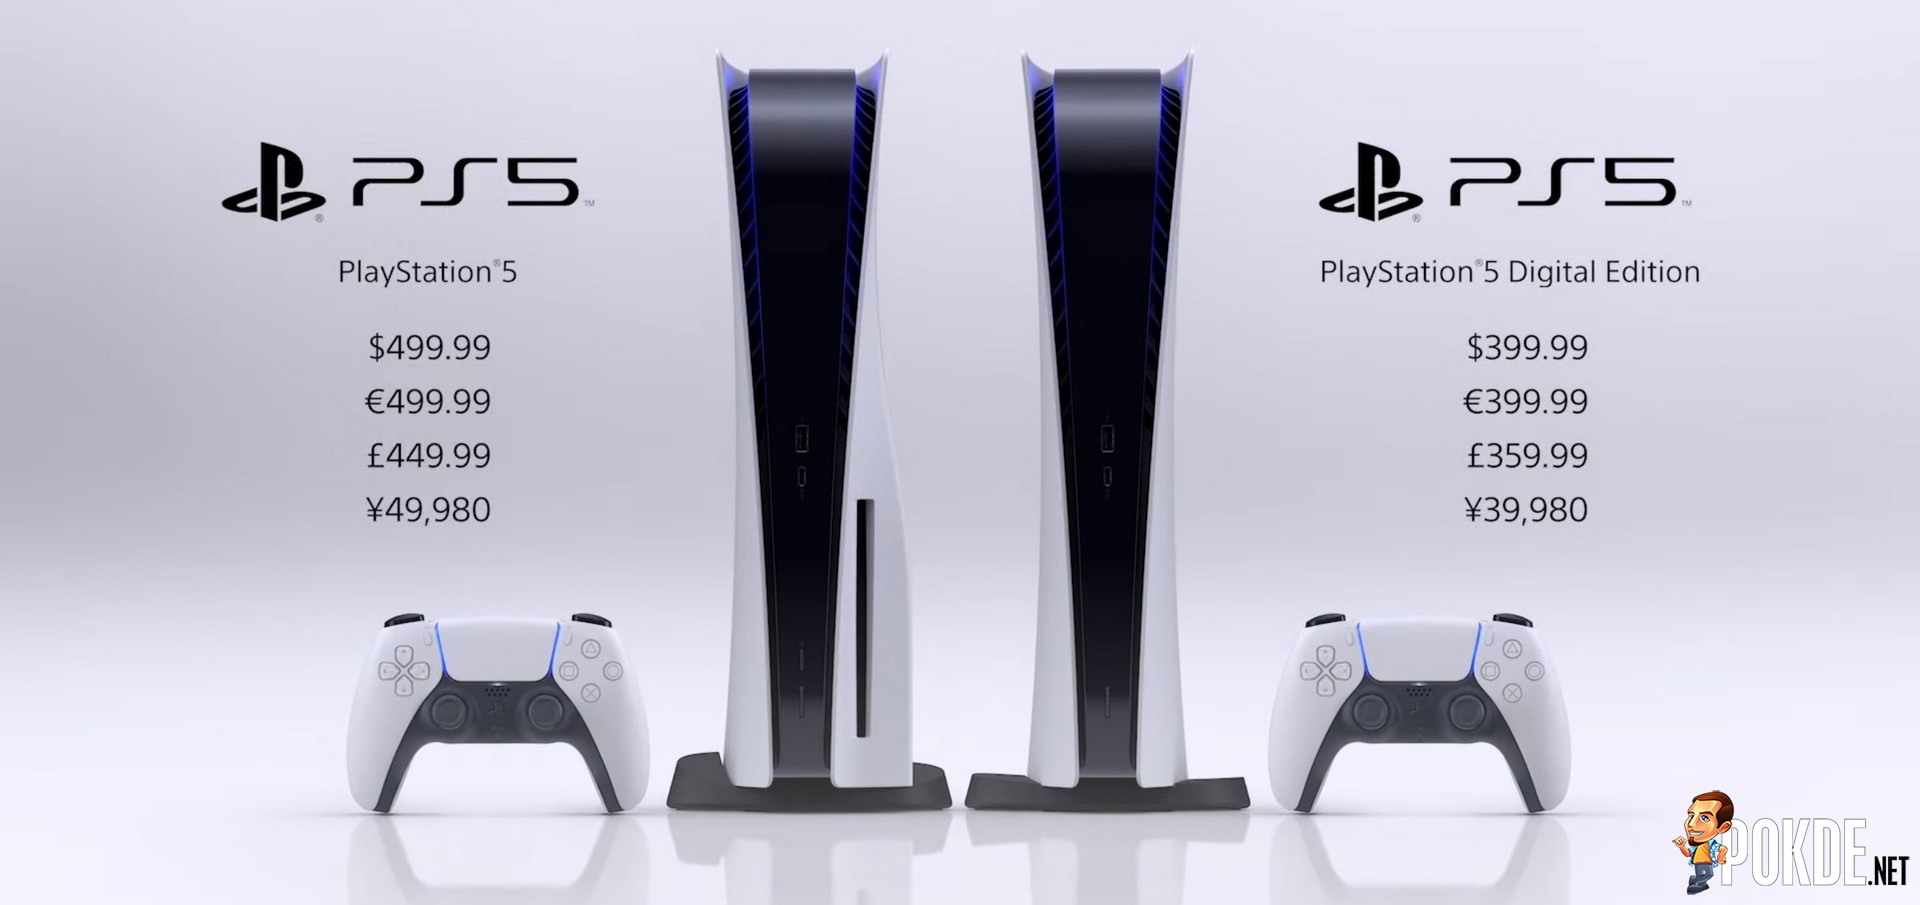 Can You Play PS2 Games on PS5?